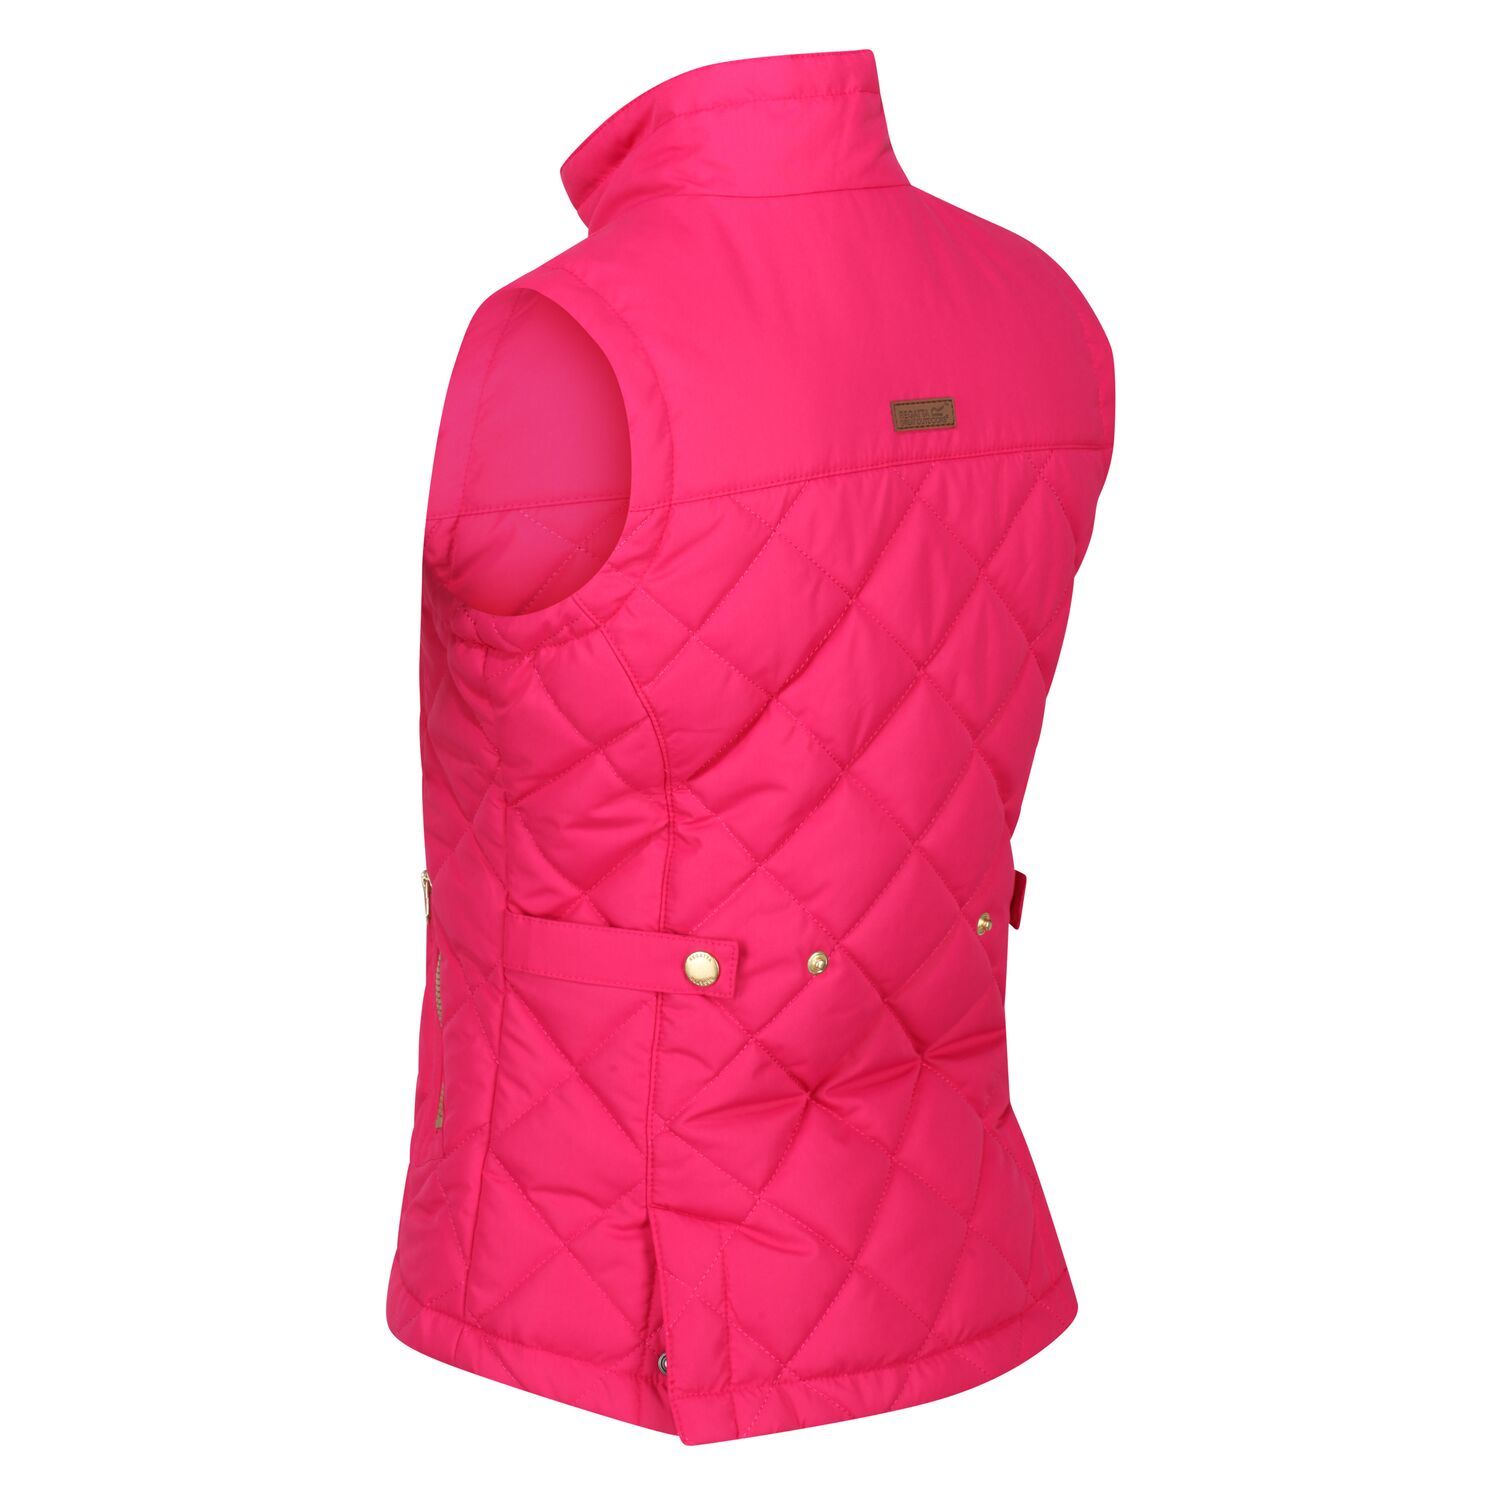 Material: 100% polyester. Water repellent quilted micro poplin fabric. Thermo guard insulation. 100% polyester taffeta printed lining. 2 zipped lower pockets. Back tab waist adjusters. Back vents with stud fastening. Chest sizes to fit: (3-4 Yrs): 55-57cm, (5-6 Yrs): 59-61cm, (7-8 Yrs): 63-67cm, (9-10 Yrs): 69-73cm, (11-12 Yrs): 75-79cm, (13 Yrs): 82cm, (14 Yrs): 86cm, (15-16 Yrs): 89-92cm.